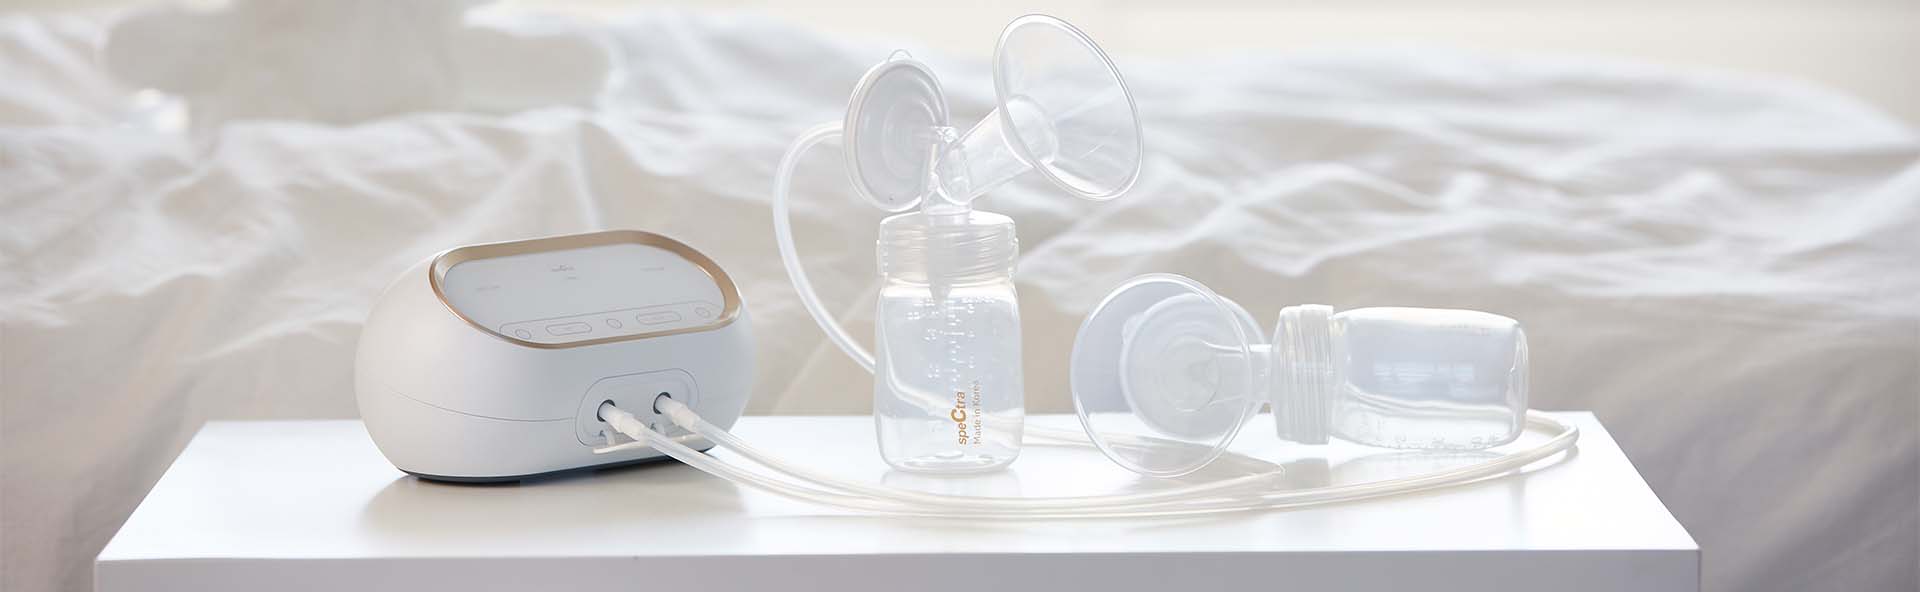 Spectra Korea dual compact breastpump with bottle on a table，Spectra 奶泵及其他配件